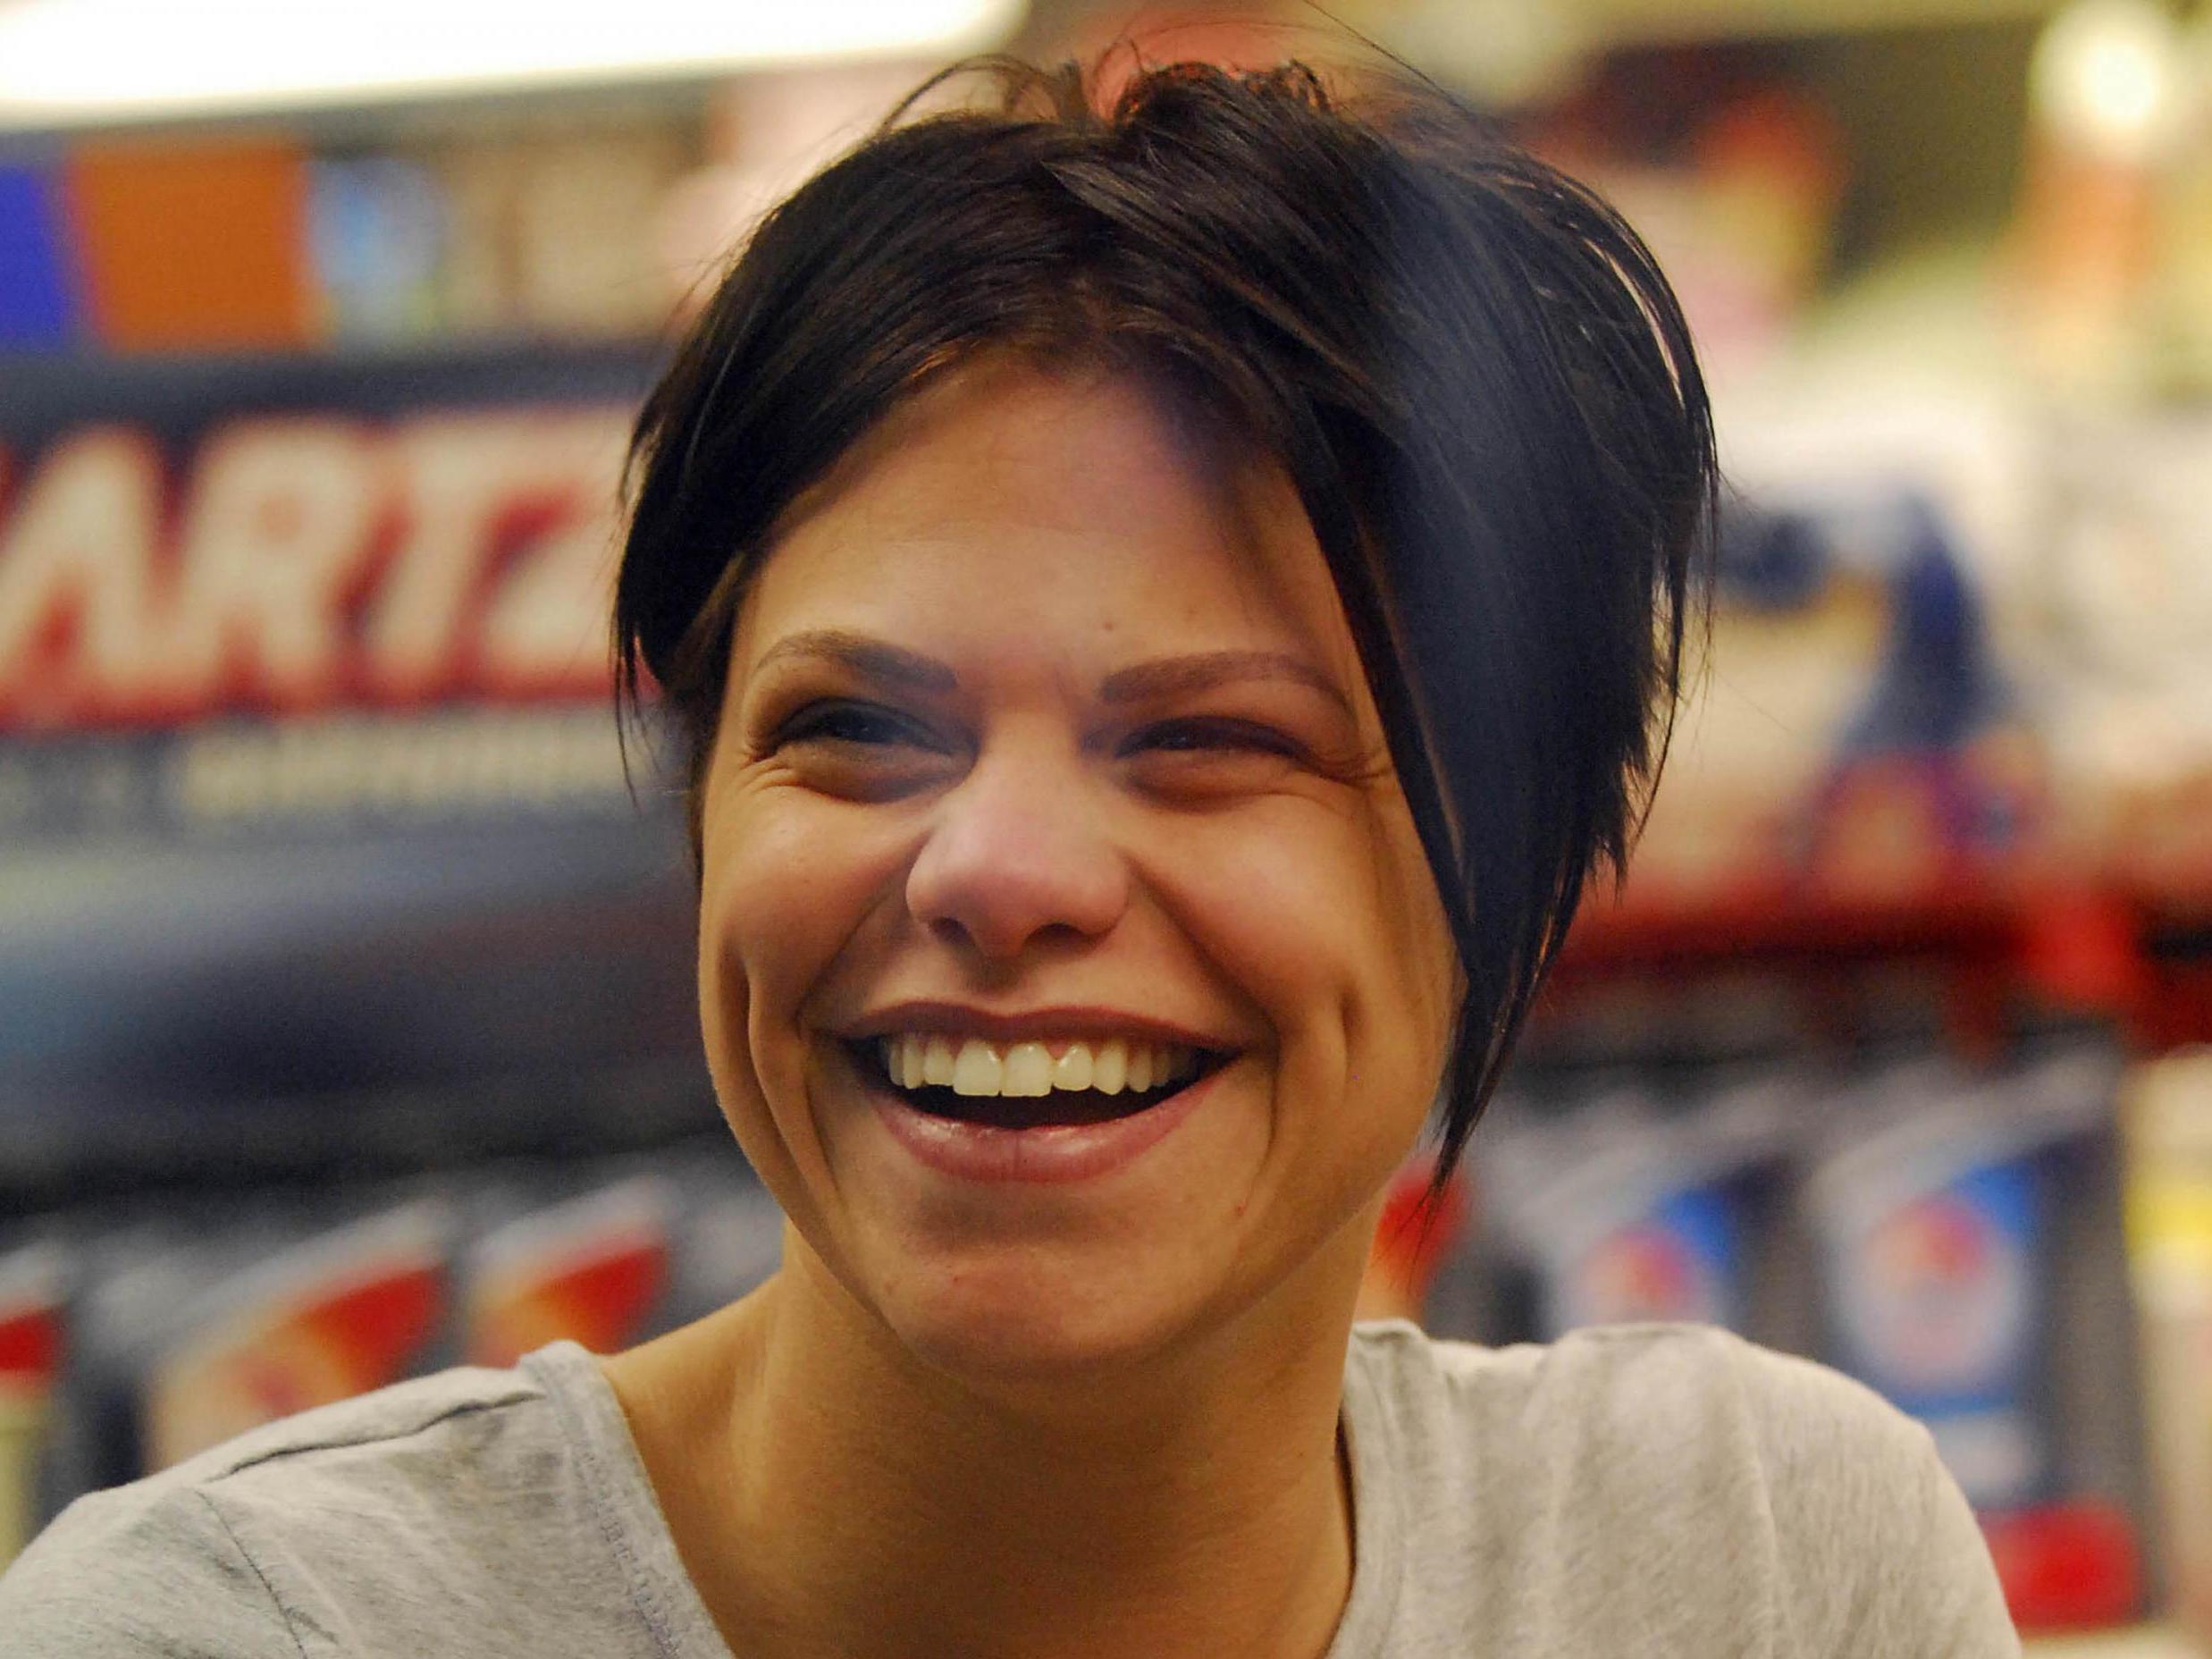 Brexit Britain Porn - Big Brother star Jade Goody's racism foretold the forces ...